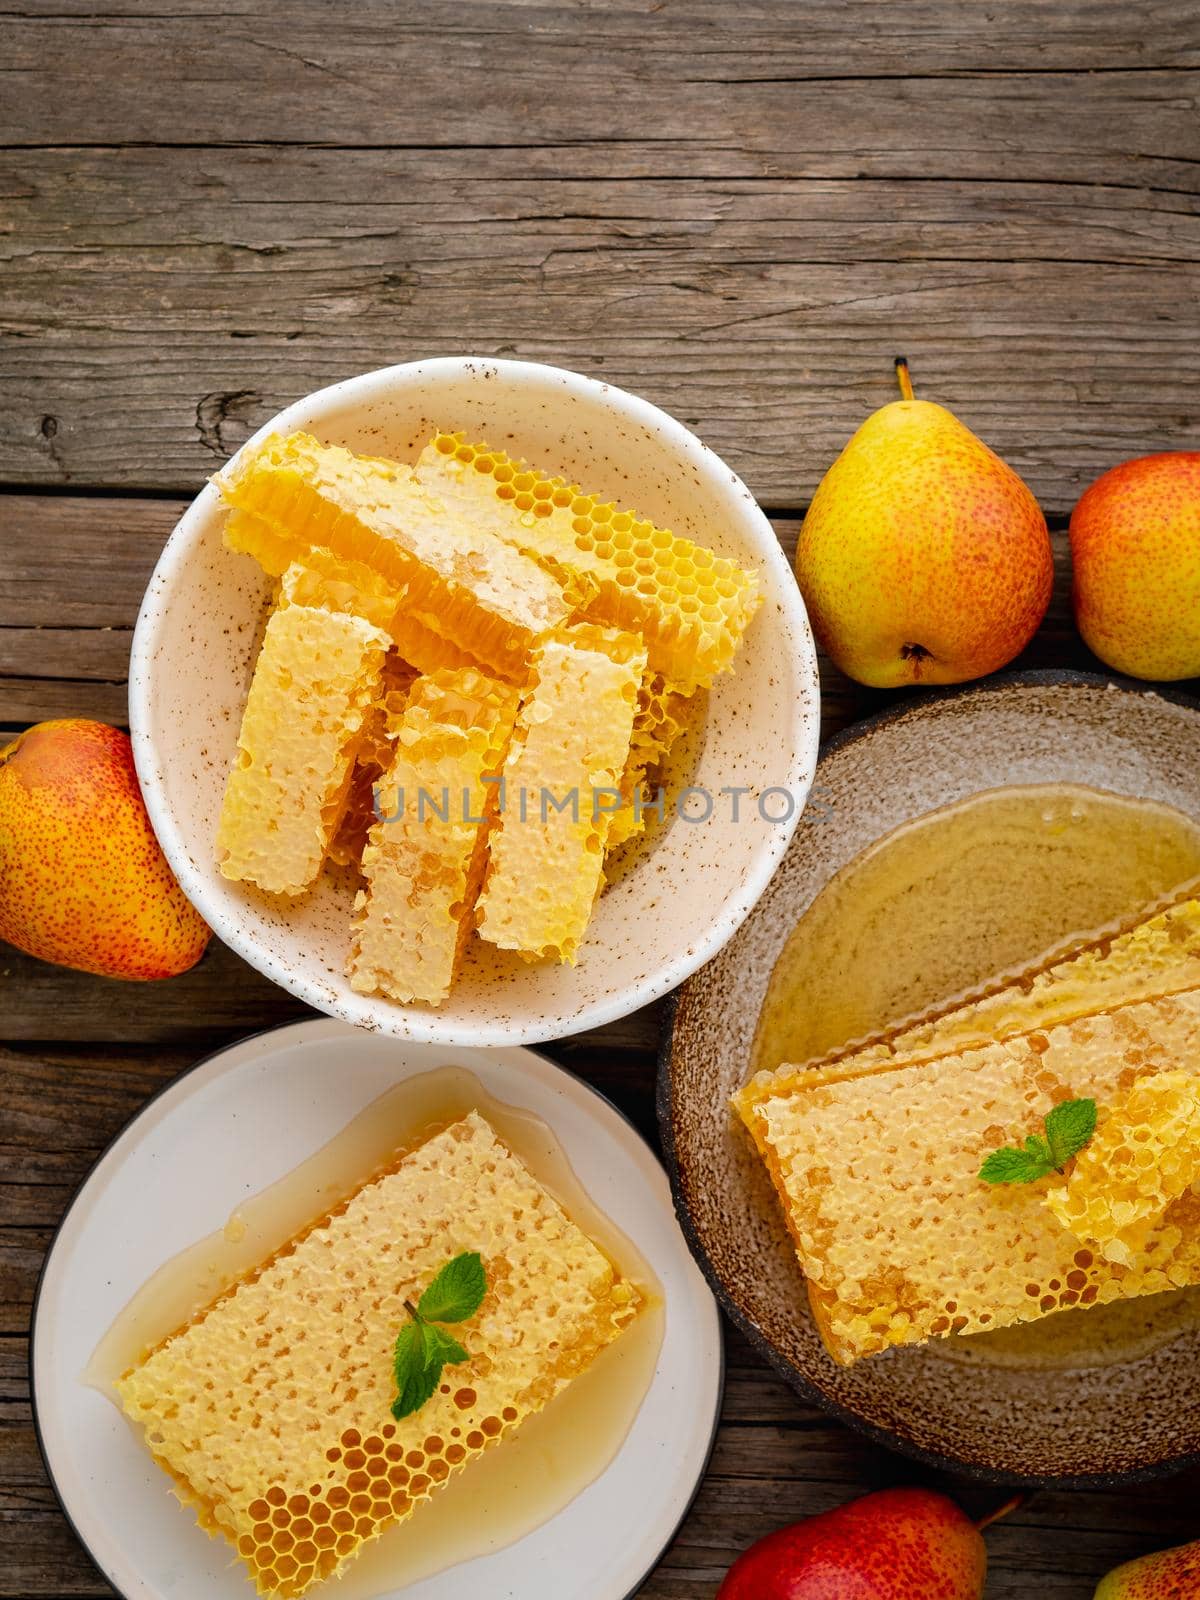 honey in honeycomb, close-up, on a brown ceramic plate, on old gray wooden rustic table, top view, vertical, copy space